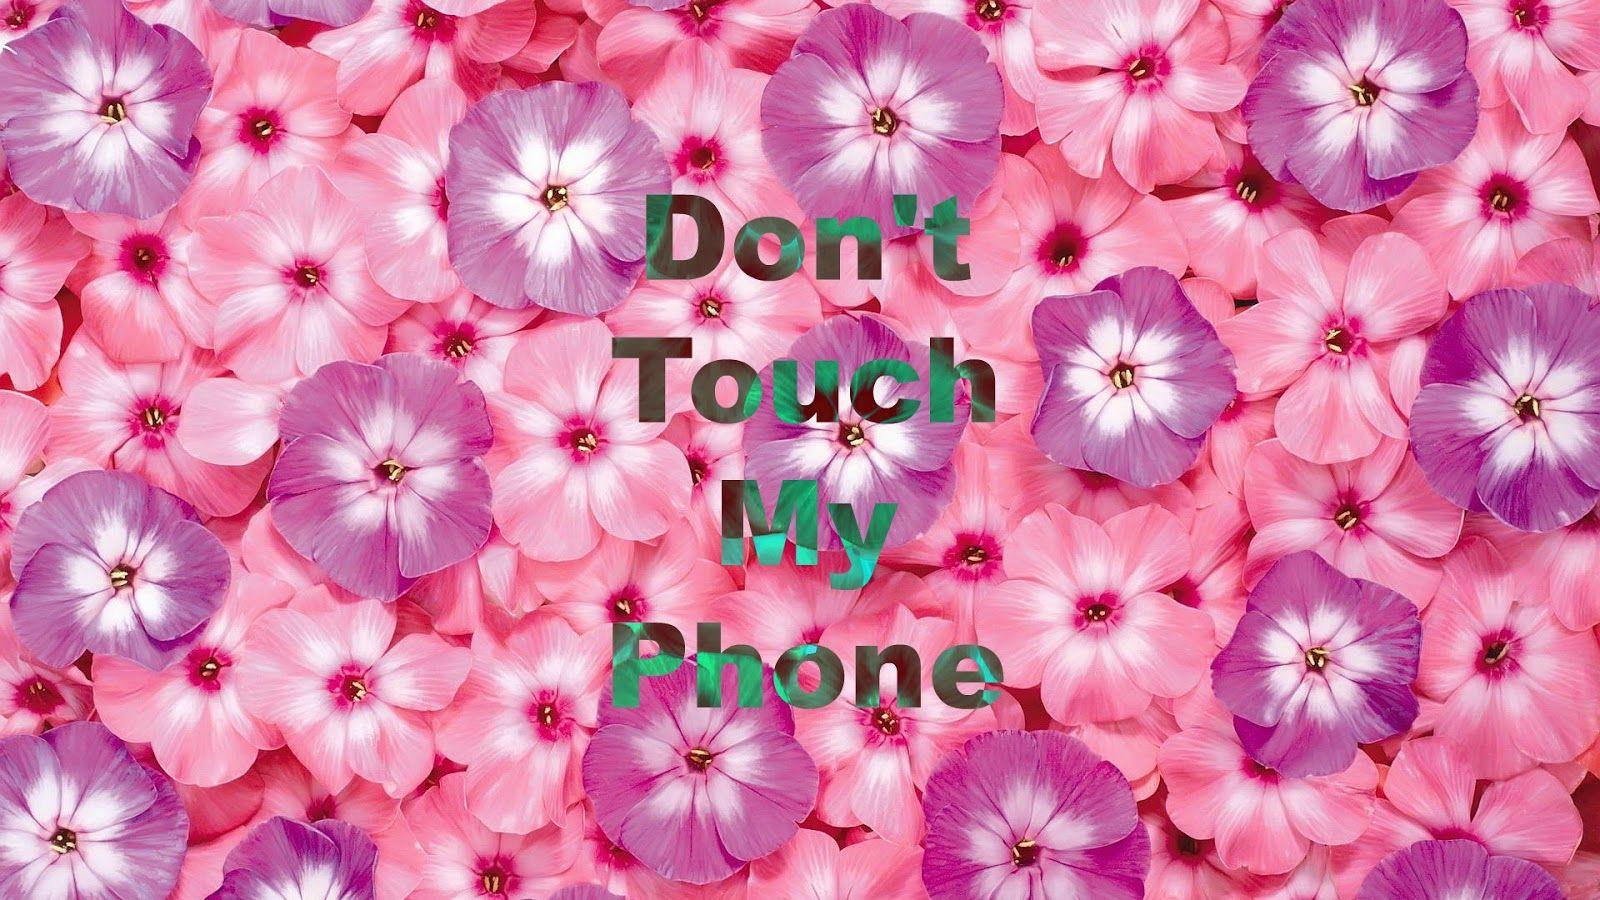 FREE DOWNLOAD HERE: Don't Touch My Phone Wallpaper for Girls